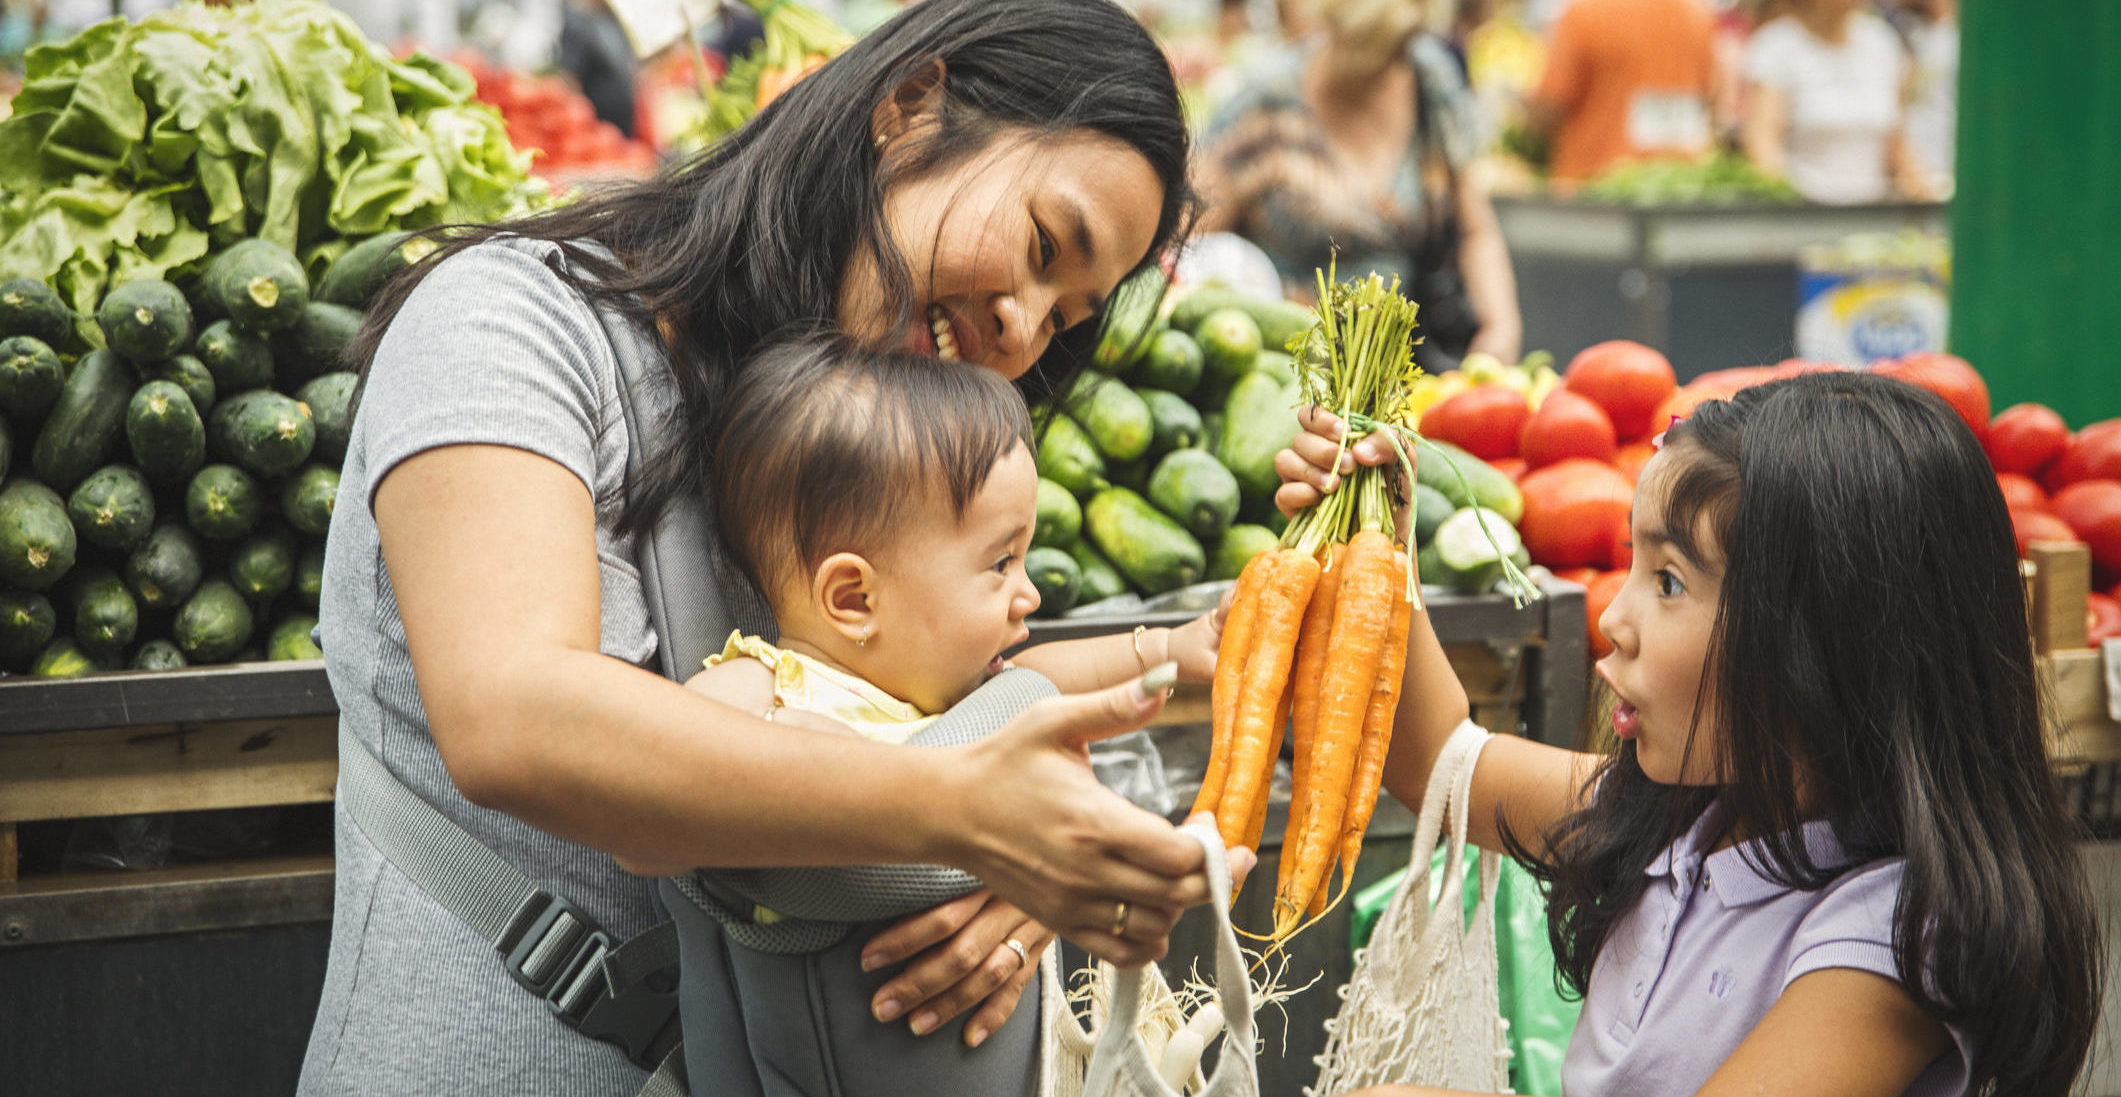 A mother and her two children shop for vegetables at a healthy food market.